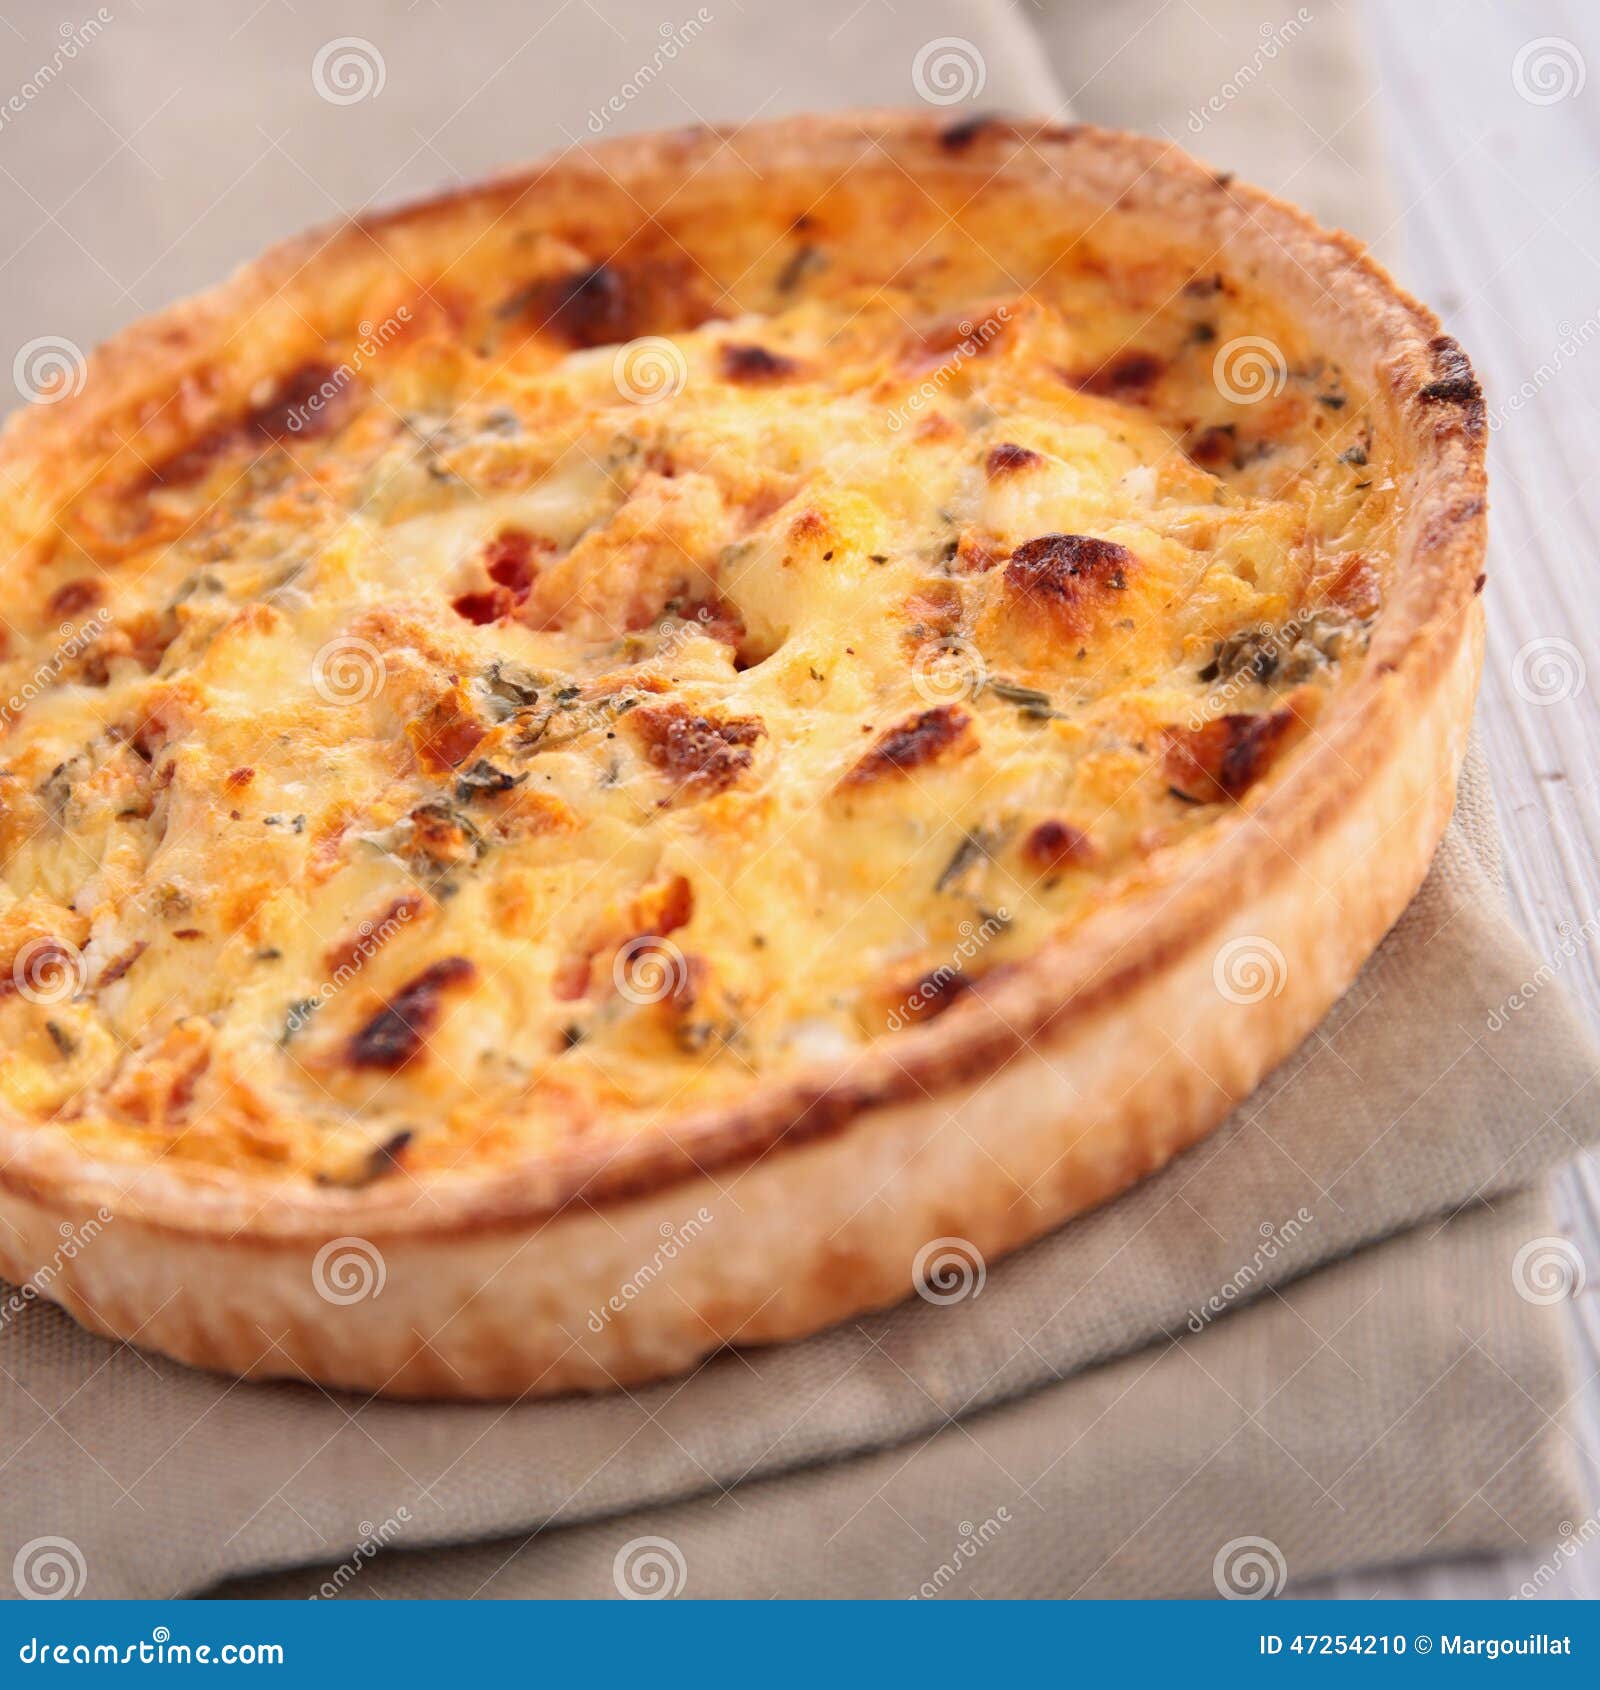 Quiche stock photo. Image of meal, fresh, lorraine, baked - 47254210